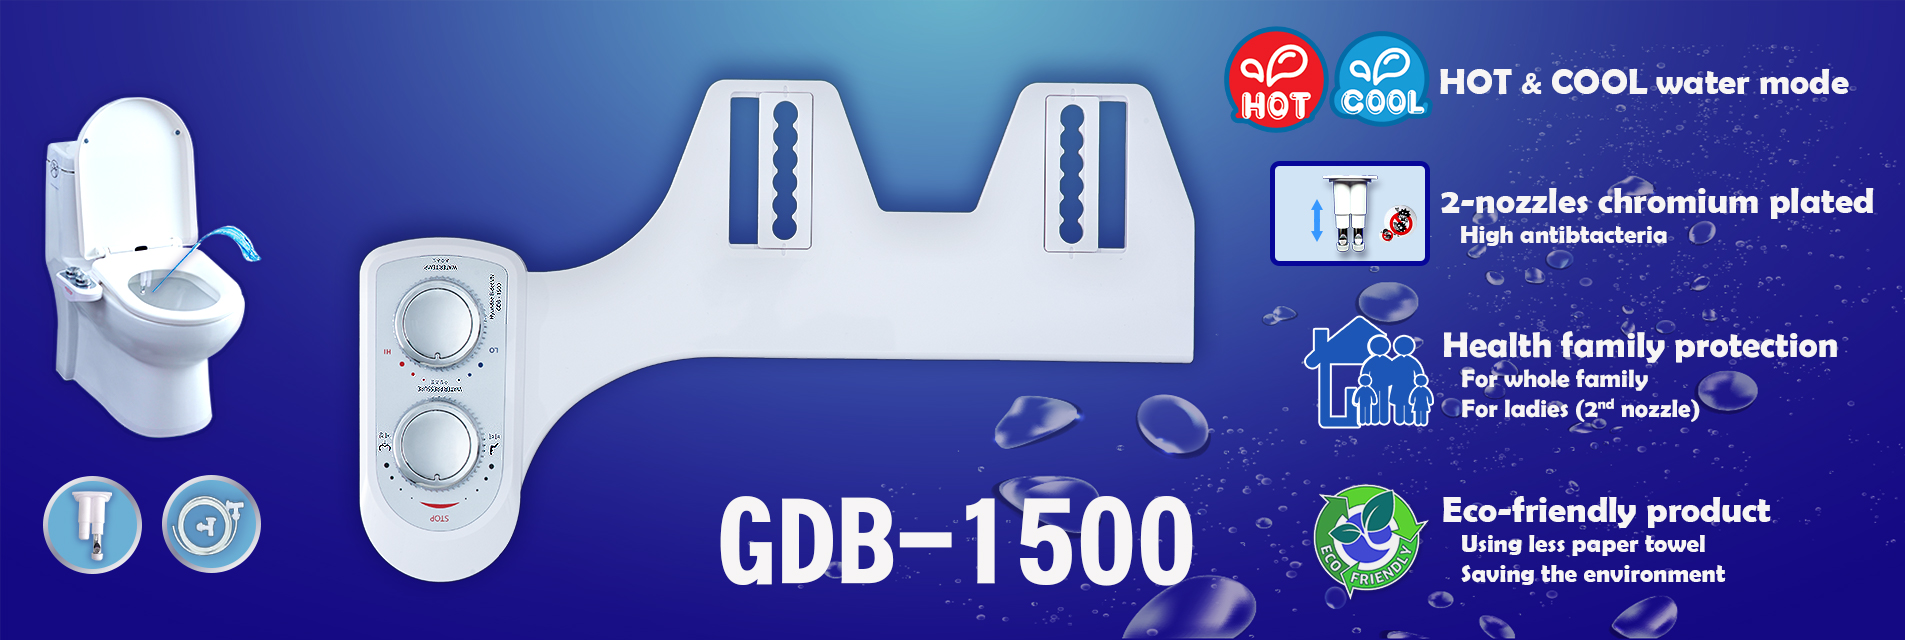 GDB-1500 Second nozzle for ladies, Hot and Cool water